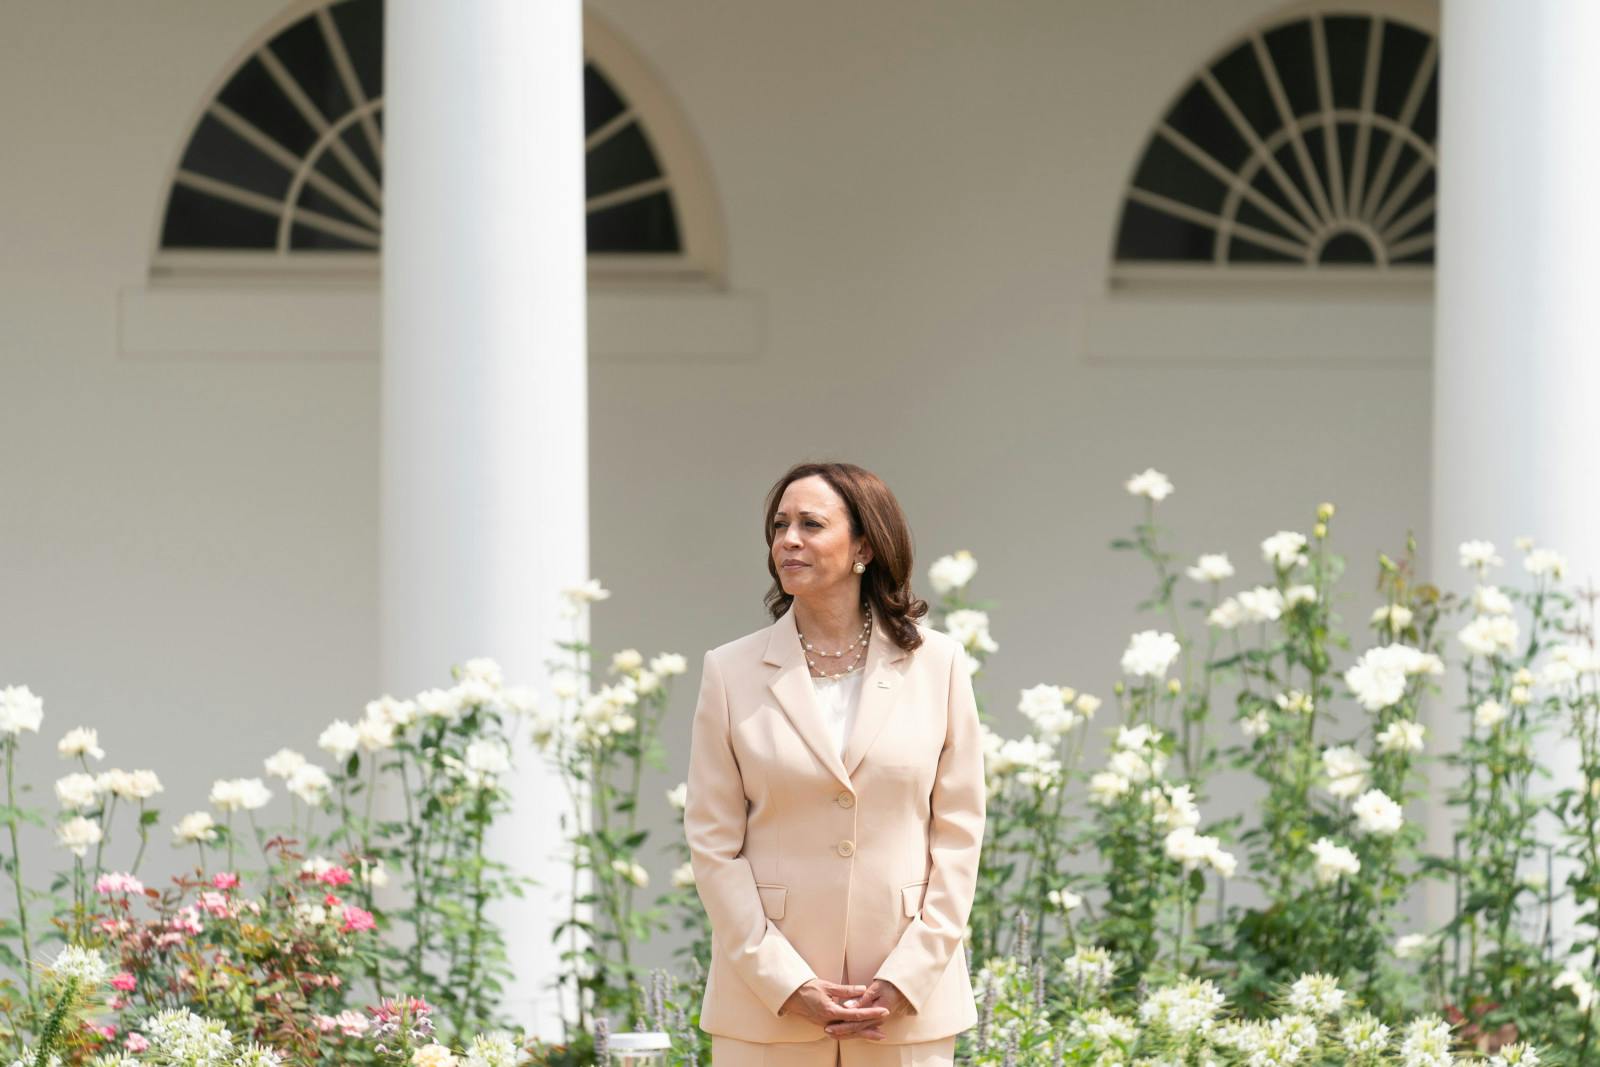 Kamala Harris attends an event celebrating the 31st Anniversary of the Americans with Disabilities Act Monday, July 26, 2021, in the Rose Garden of the White House. (Official White House Photo by Lawrence Jackson)